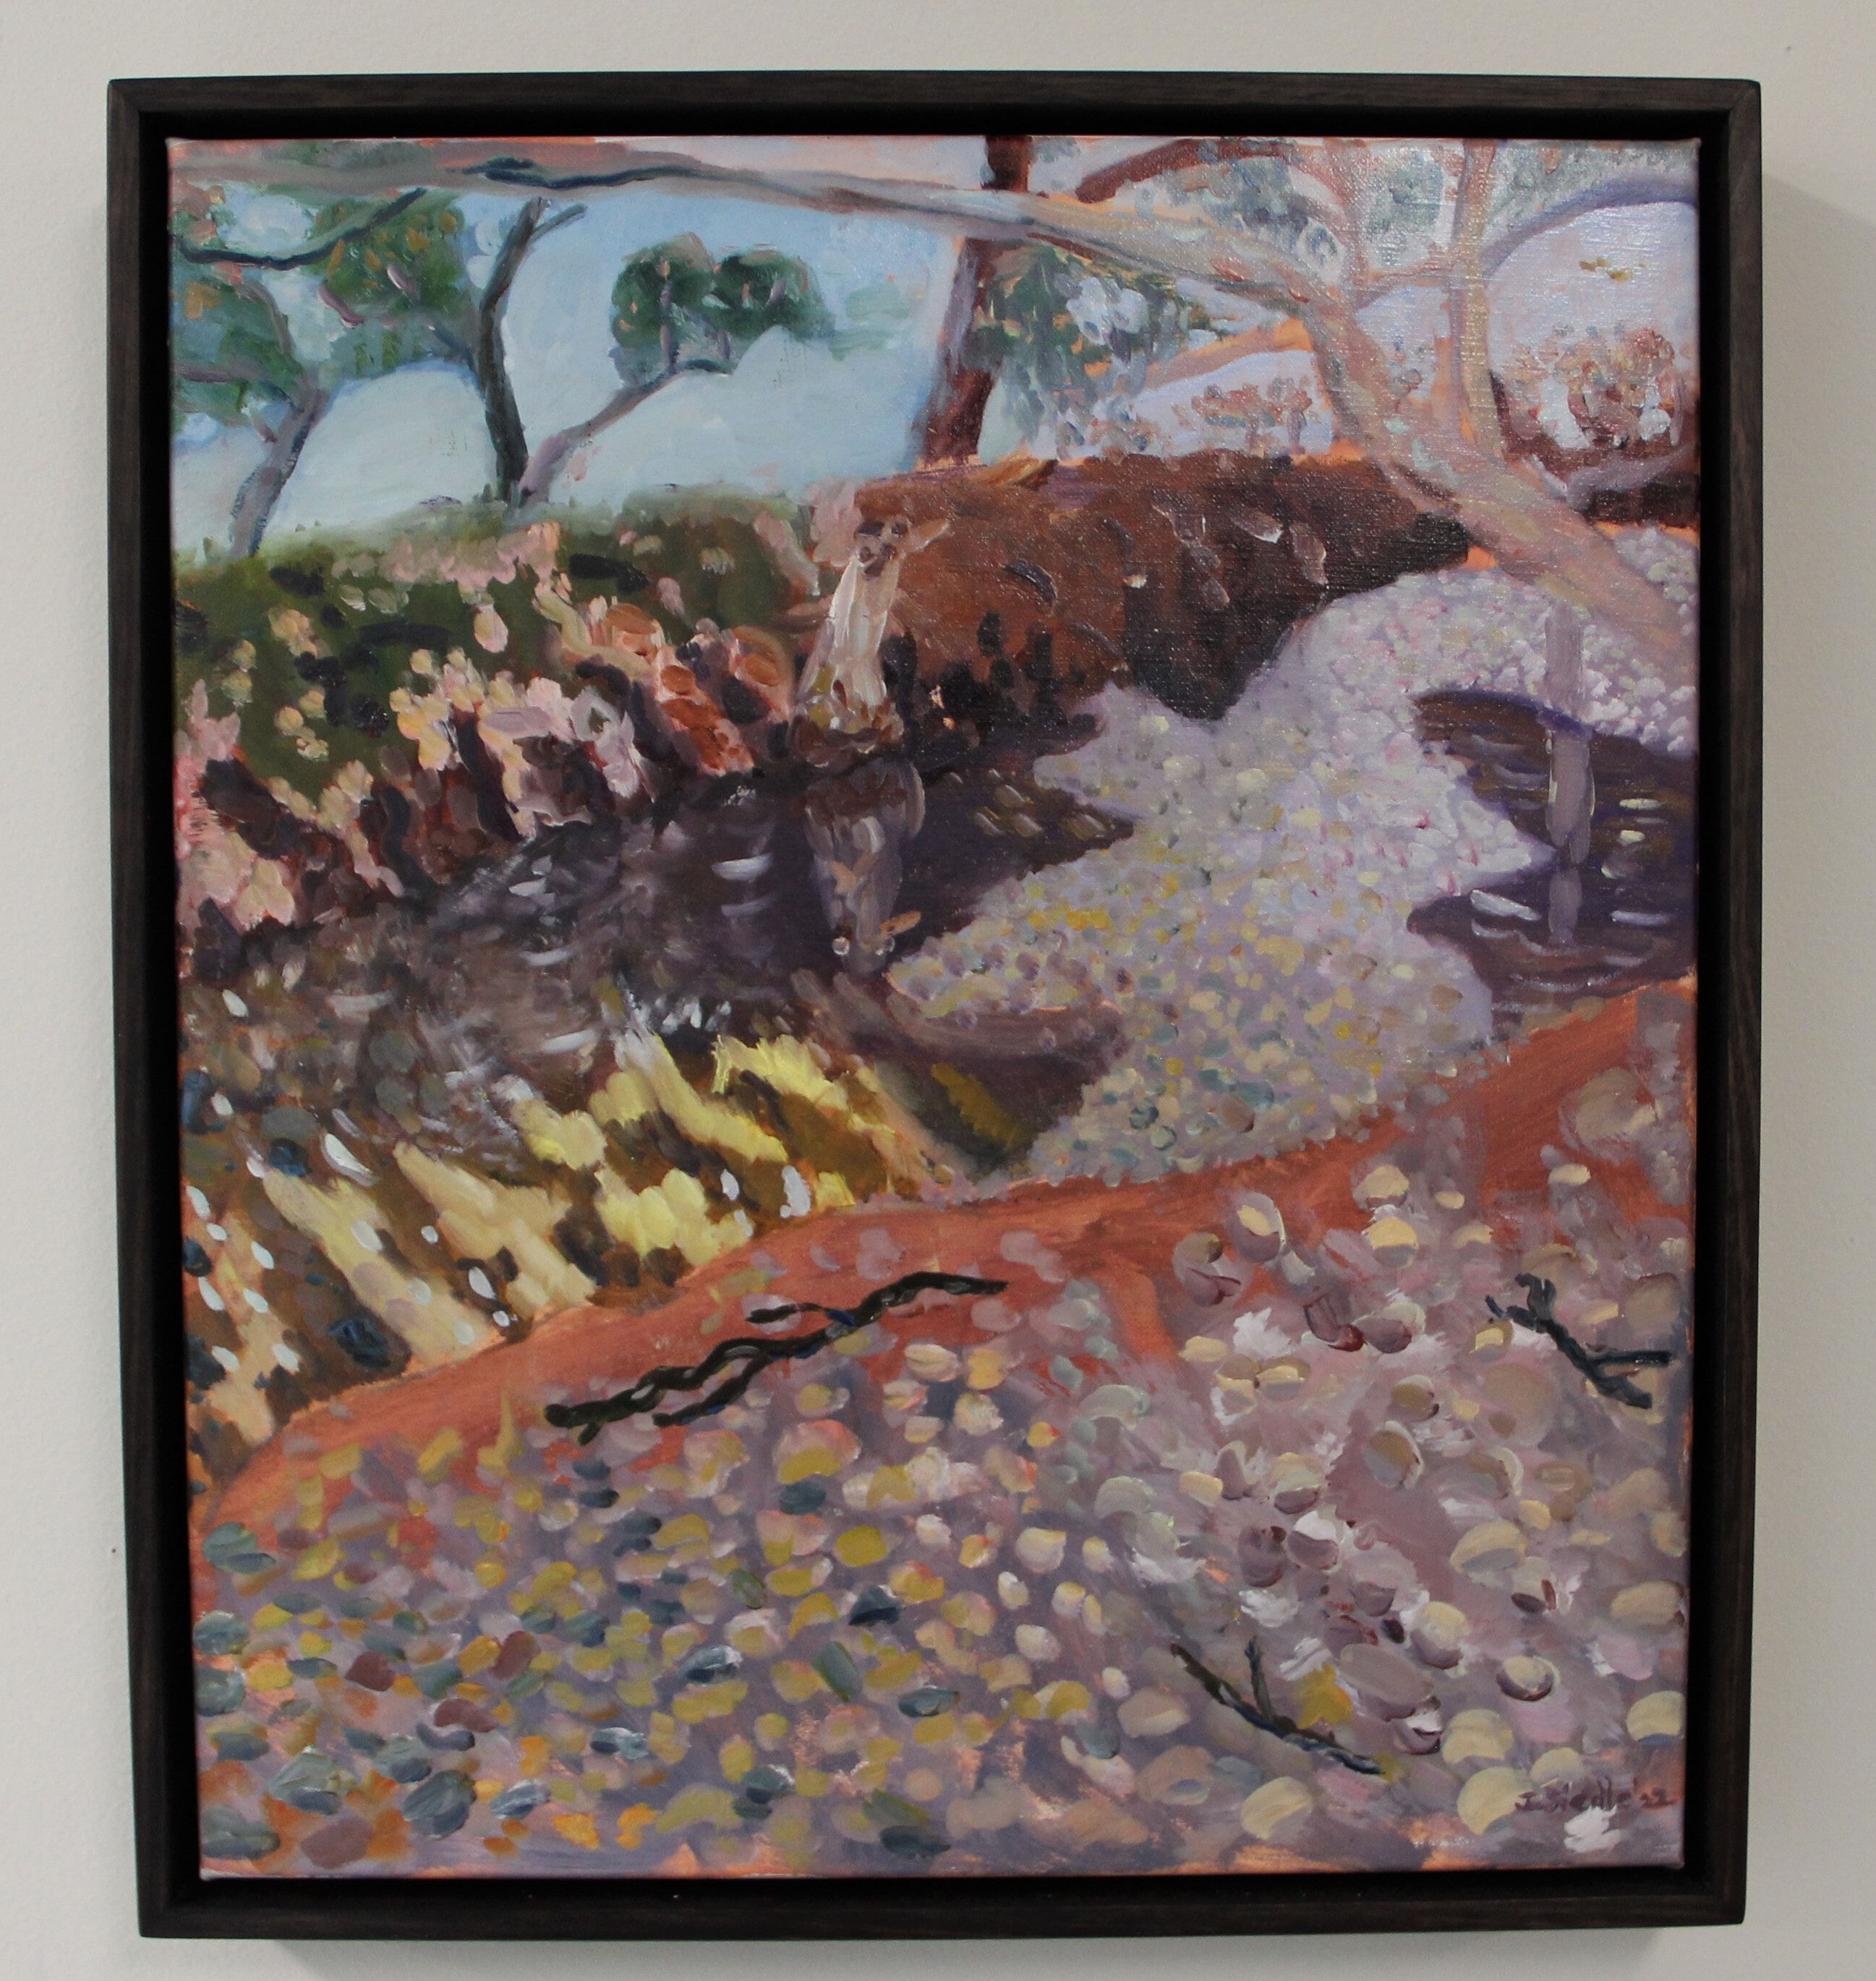 Framed Trickle of water in the Dry Creek Bed, Fowlers Gap. Oil on linen, 2022.